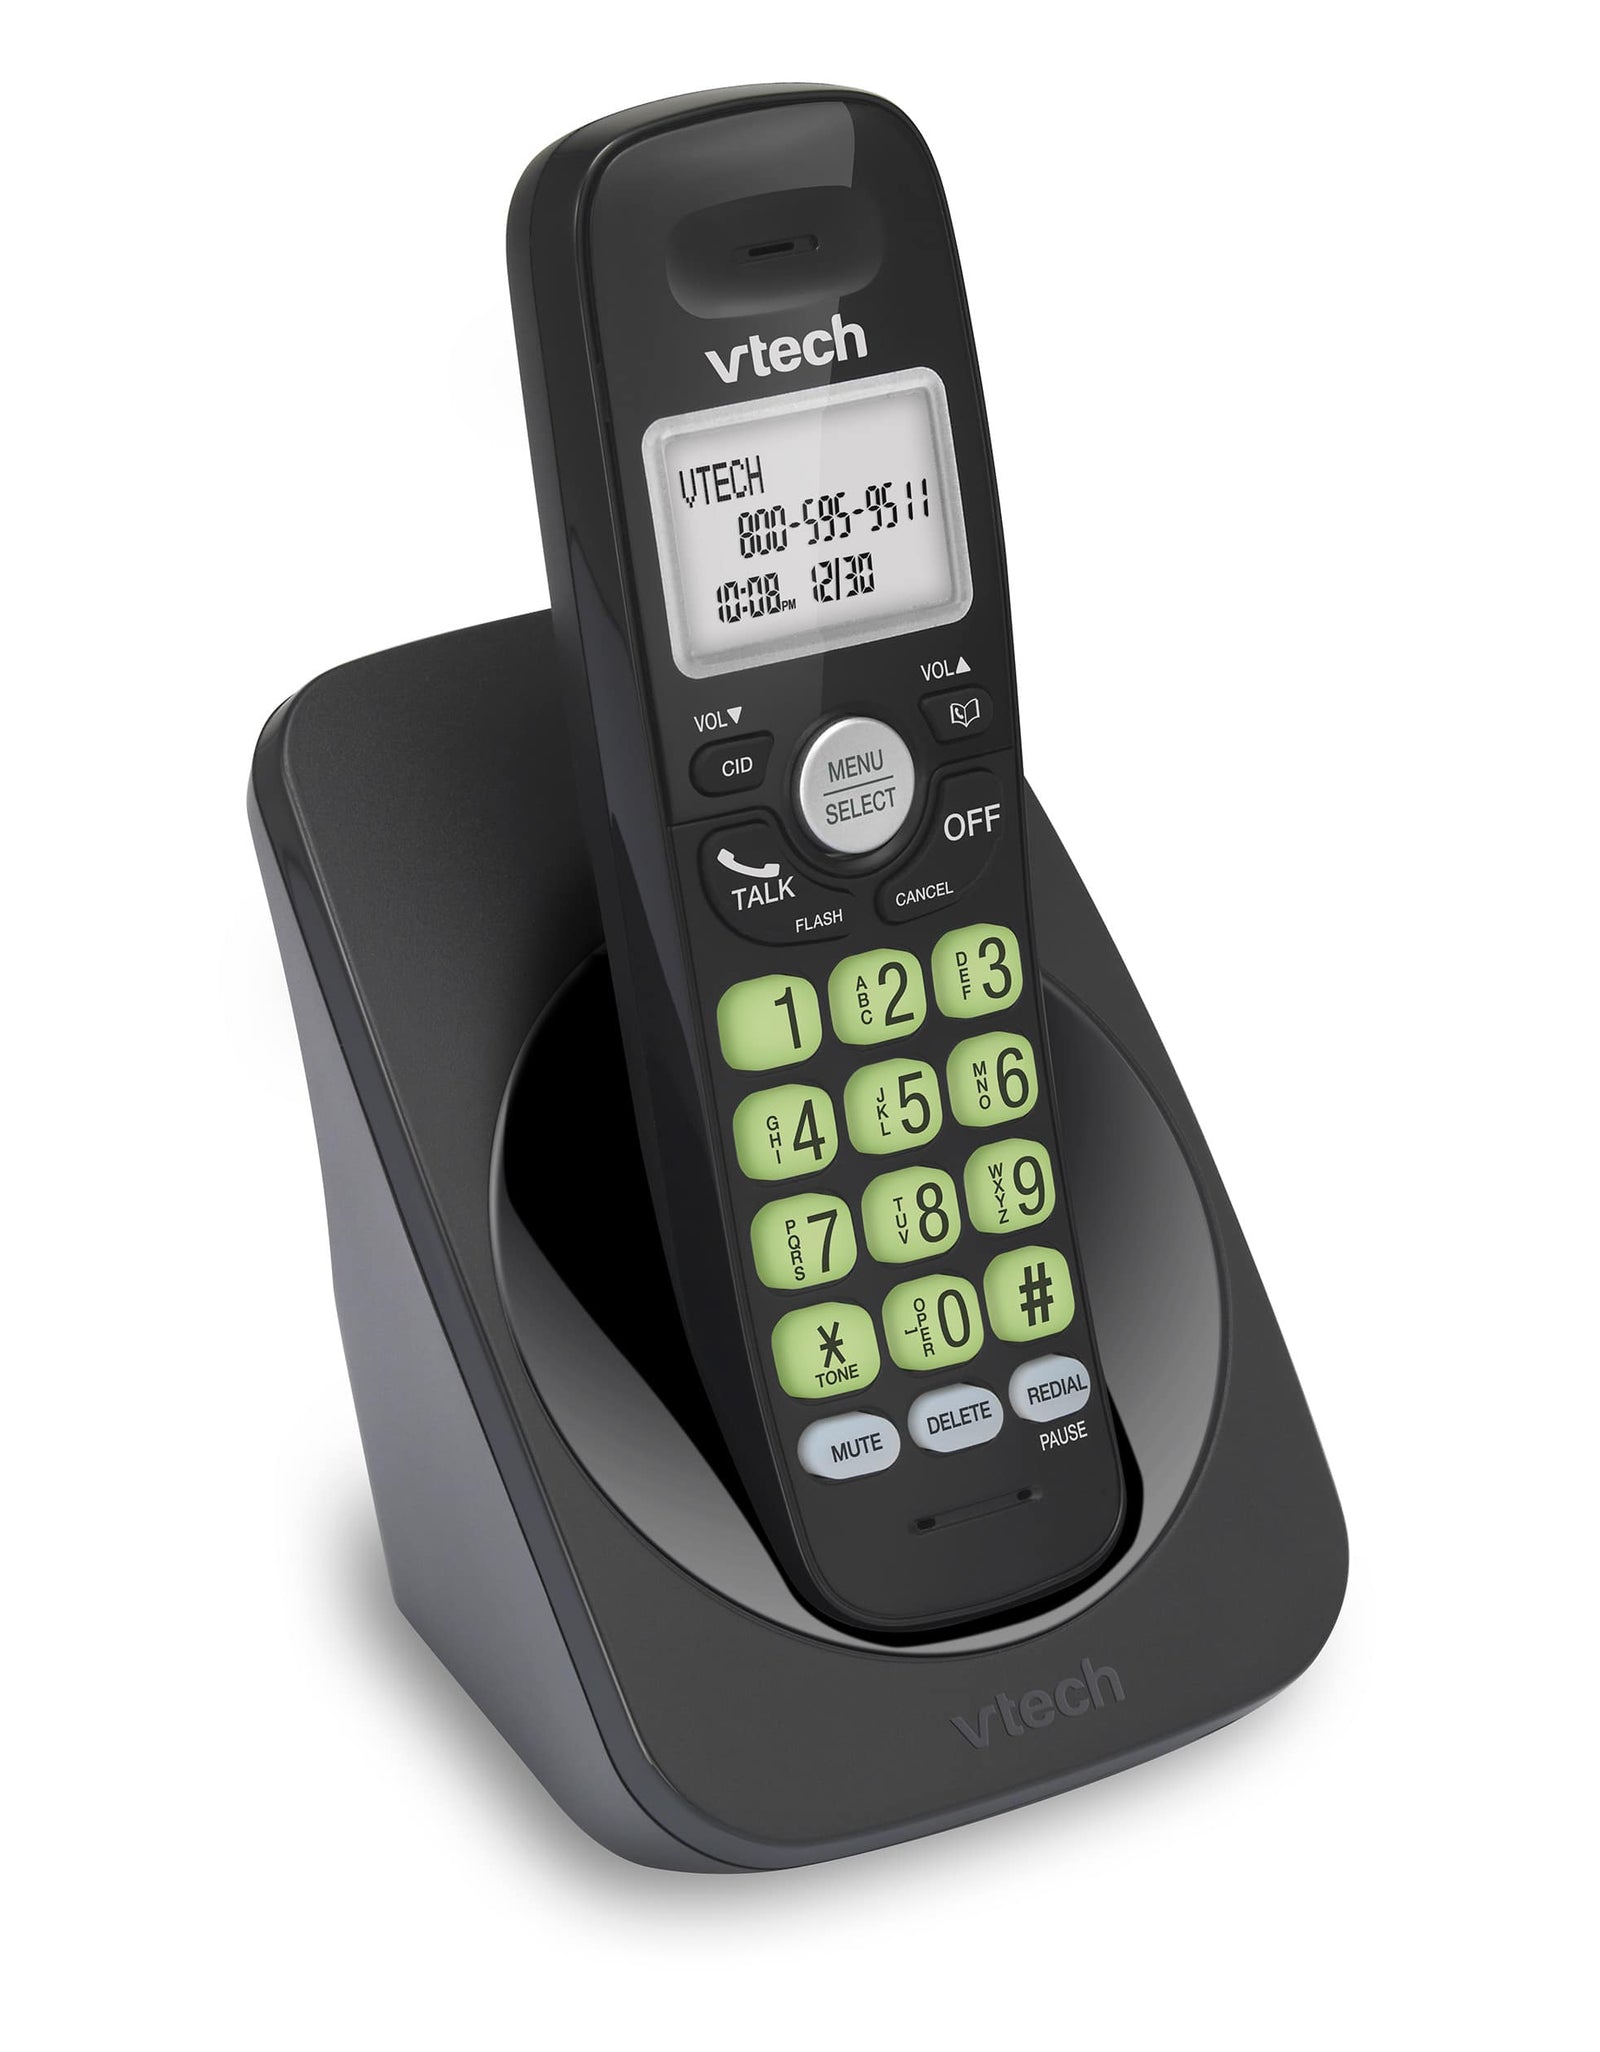 VTECH DECT 6.0 Cordless Phone, Black - with Full Duplex Speakerphone and Caller ID/Call Waiting